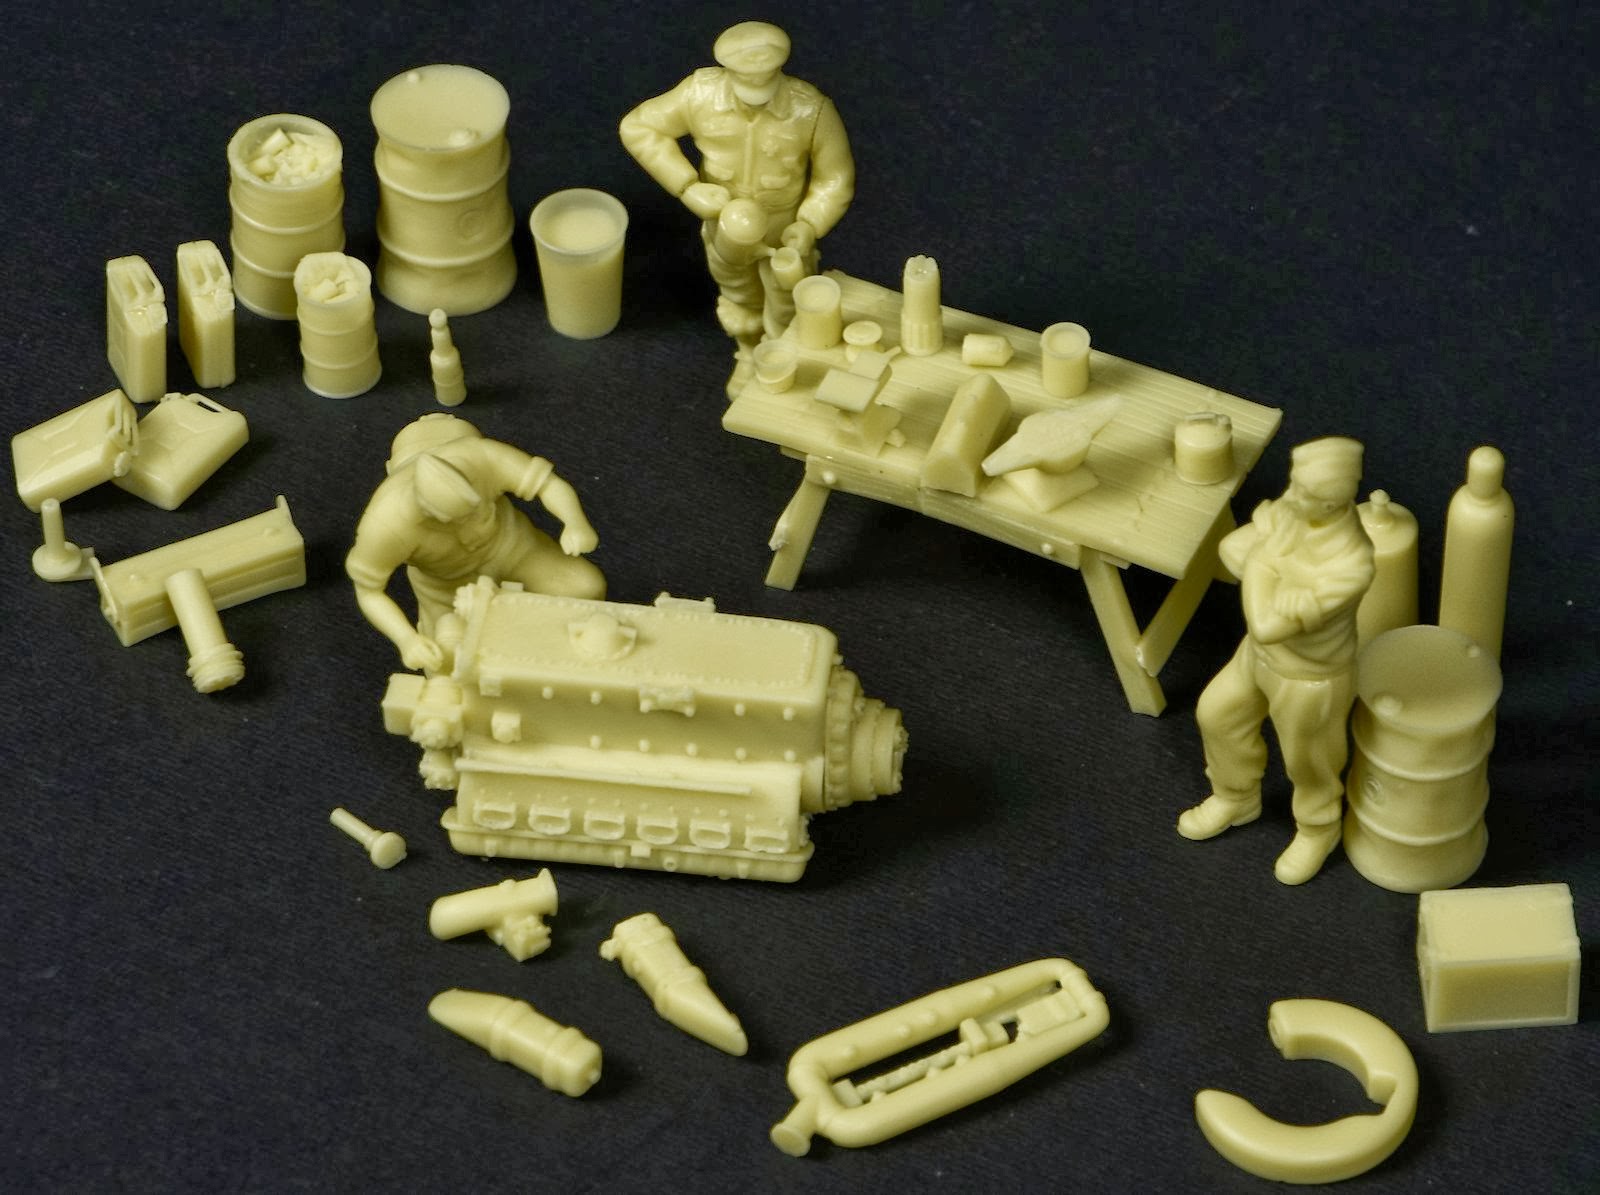 3 Figures, Parts and Table 2774 Verlinden 1/32 Luftwaffe Repair Section WWII